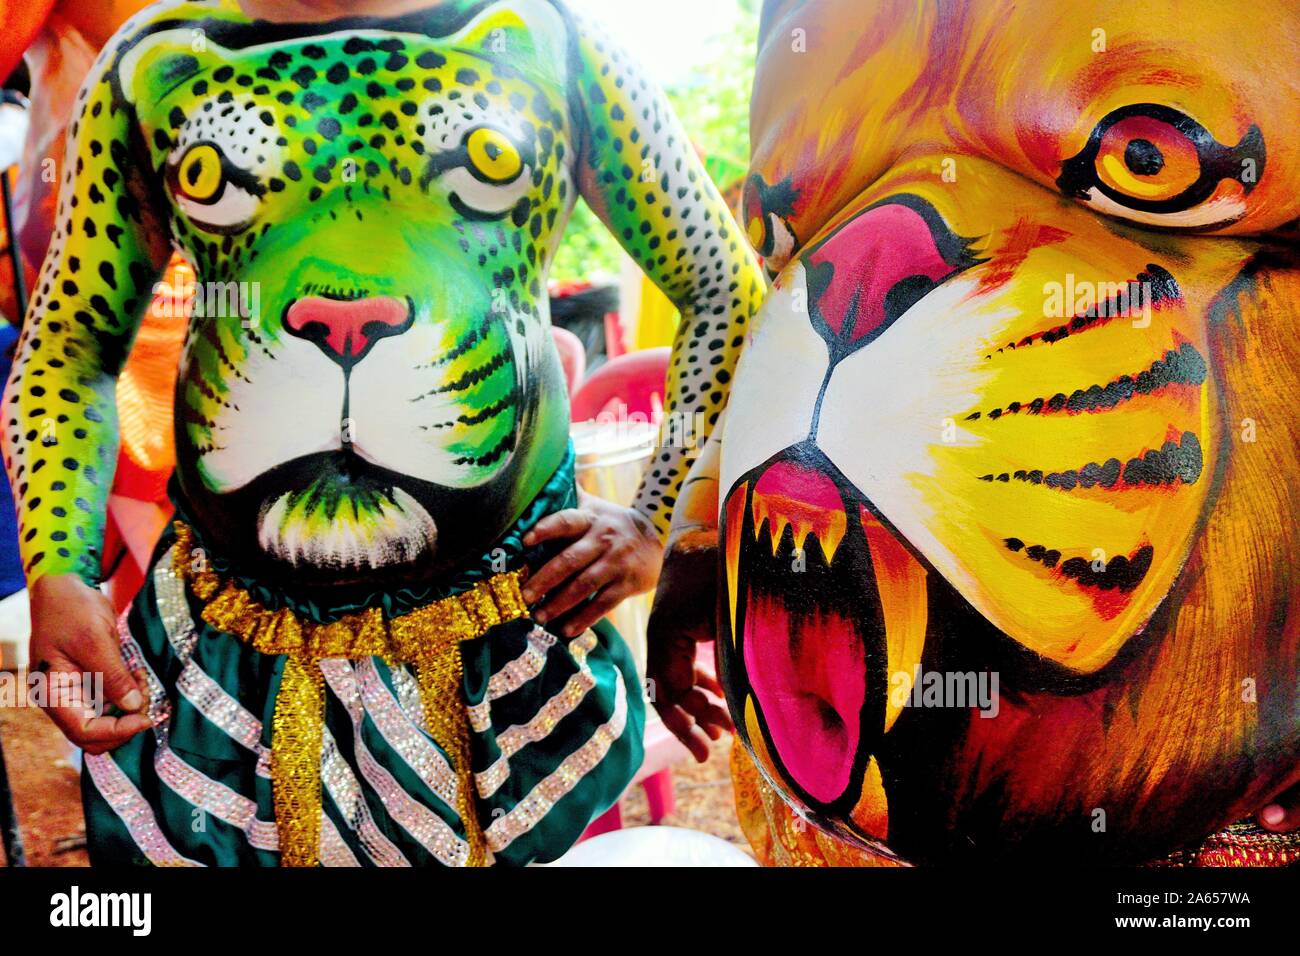 Painted human bodies for Pulikali Tiger Dance, Onam festival, Thrissur, Kerala, India, Asia Stock Photo